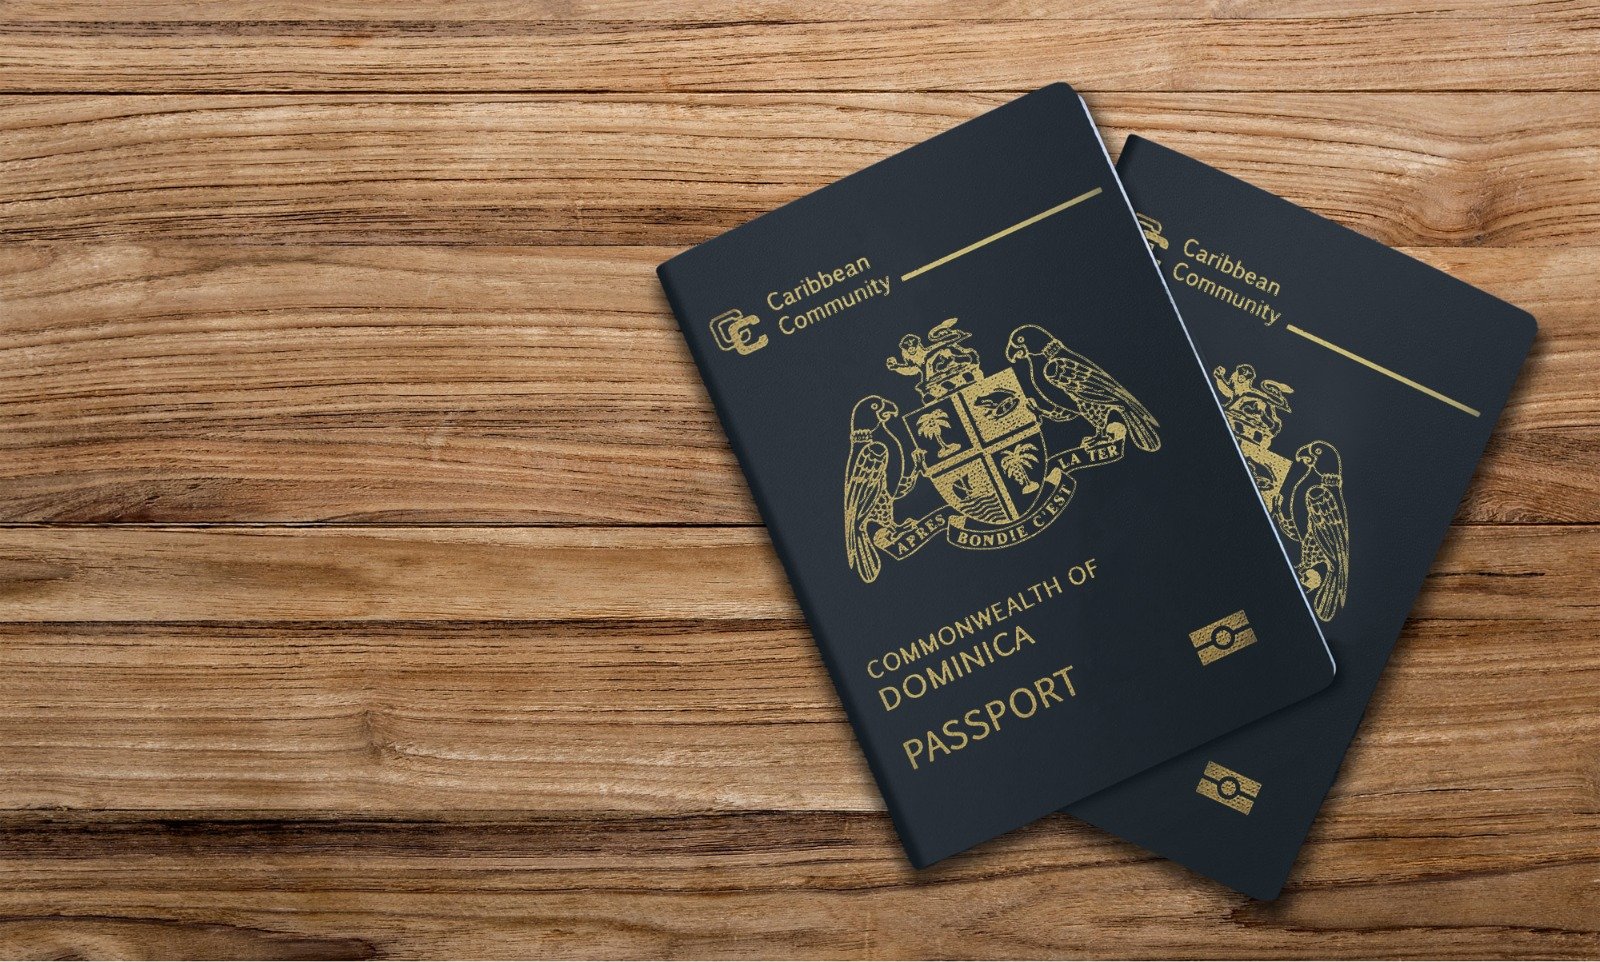 How Can a Dominican Passport Change Your Fate and Life?